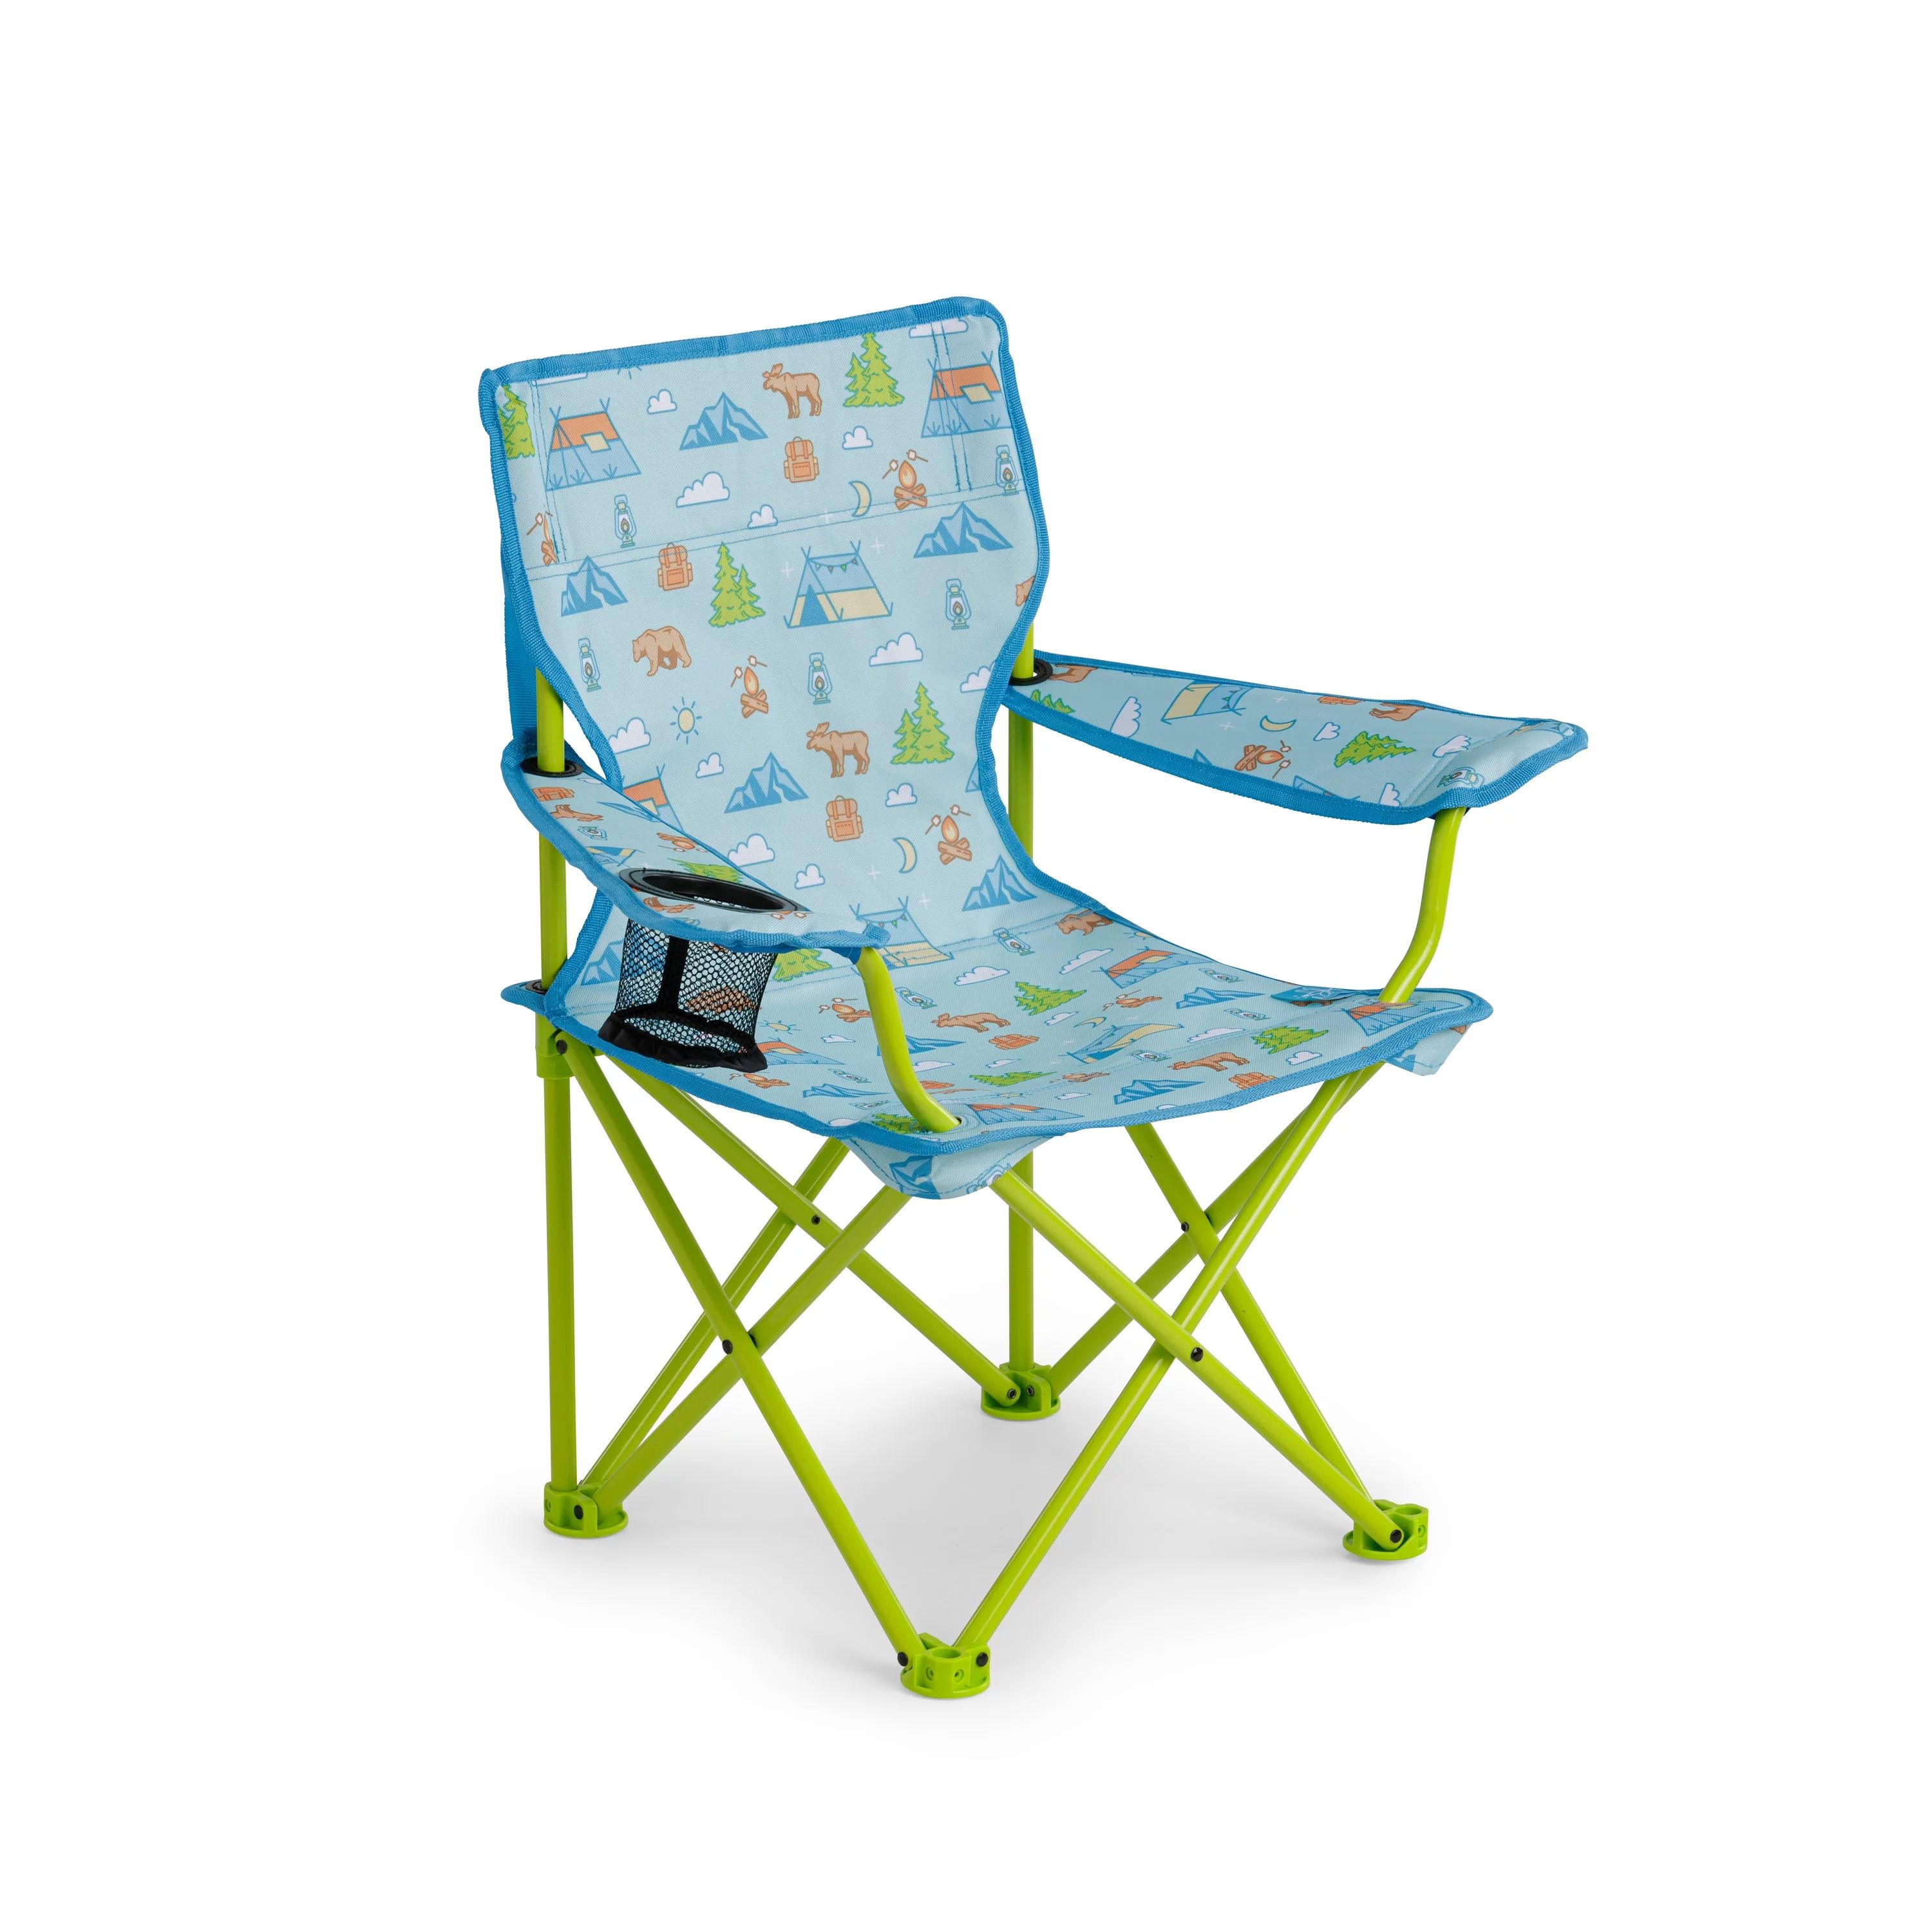 Firefly! Outdoor Gear Youth Camping Chair - Blue/Green Color | Walmart (US)